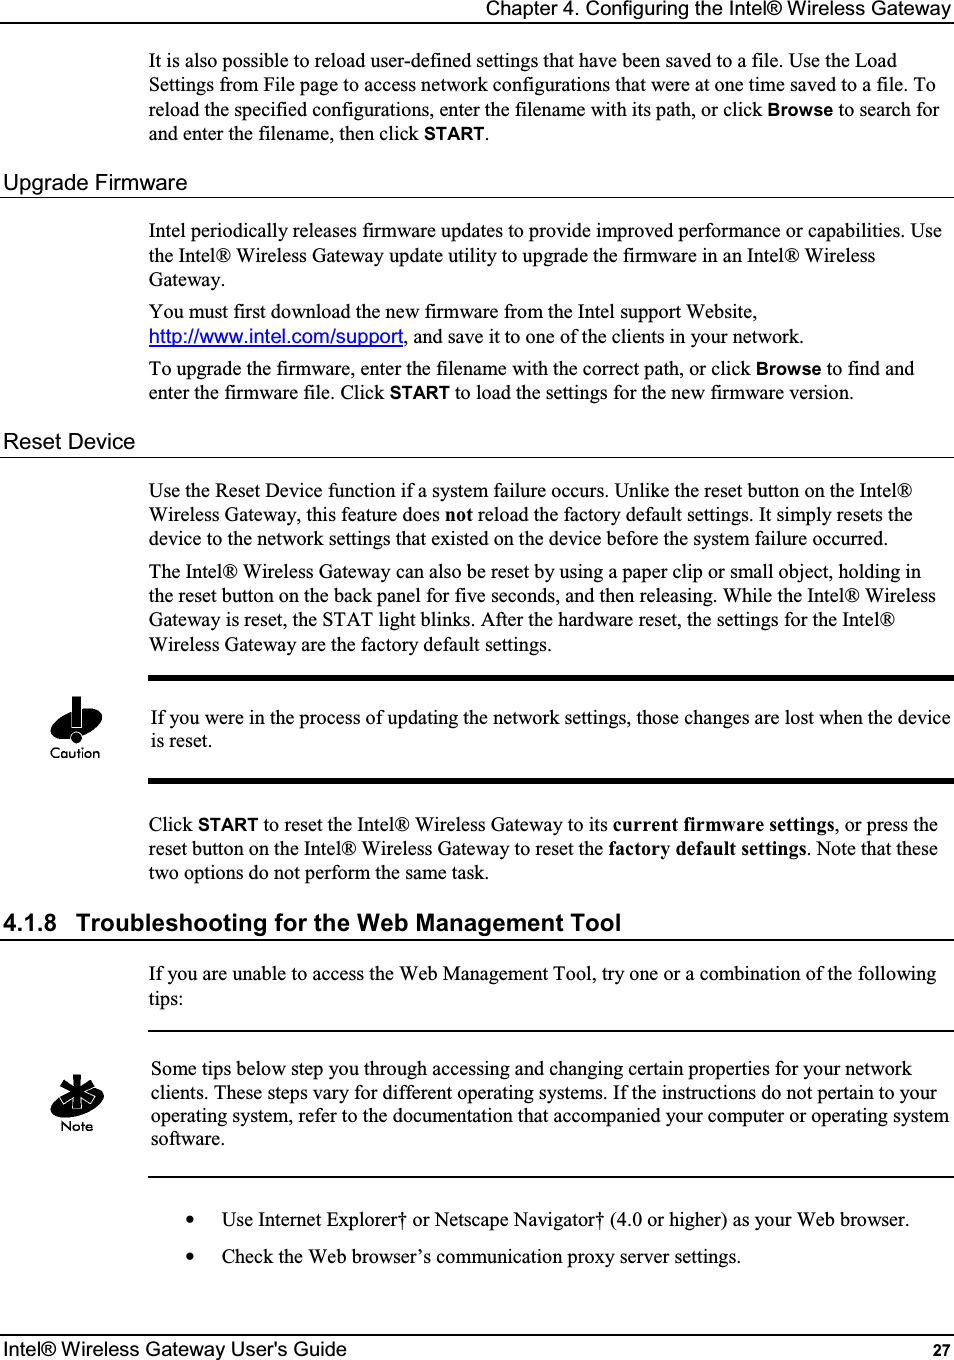 Chapter 4. Configuring the Intel® Wireless Gateway Intel® Wireless Gateway User&apos;s Guide  27 It is also possible to reload user-defined settings that have been saved to a file. Use the Load Settings from File page to access network configurations that were at one time saved to a file. To reload the specified configurations, enter the filename with its path, or click Browse to search for and enter the filename, then click START. Upgrade Firmware Intel periodically releases firmware updates to provide improved performance or capabilities. Use the Intel® Wireless Gateway update utility to upgrade the firmware in an Intel® Wireless Gateway. You must first download the new firmware from the Intel support Website, http://www.intel.com/support, and save it to one of the clients in your network. To upgrade the firmware, enter the filename with the correct path, or click Browse to find and enter the firmware file. Click START to load the settings for the new firmware version. Reset Device Use the Reset Device function if a system failure occurs. Unlike the reset button on the Intel® Wireless Gateway, this feature does not reload the factory default settings. It simply resets the device to the network settings that existed on the device before the system failure occurred. The Intel® Wireless Gateway can also be reset by using a paper clip or small object, holding in the reset button on the back panel for five seconds, and then releasing. While the Intel® Wireless Gateway is reset, the STAT light blinks. After the hardware reset, the settings for the Intel® Wireless Gateway are the factory default settings.   If you were in the process of updating the network settings, those changes are lost when the device is reset.  Click START to reset the Intel® Wireless Gateway to its current firmware settings, or press the reset button on the Intel® Wireless Gateway to reset the factory default settings. Note that these two options do not perform the same task. 4.1.8  Troubleshooting for the Web Management Tool If you are unable to access the Web Management Tool, try one or a combination of the following tips:   Some tips below step you through accessing and changing certain properties for your network clients. These steps vary for different operating systems. If the instructions do not pertain to your operating system, refer to the documentation that accompanied your computer or operating system software.  •  Use Internet Explorer† or Netscape Navigator† (4.0 or higher) as your Web browser. •  Check the Web browser’s communication proxy server settings. 